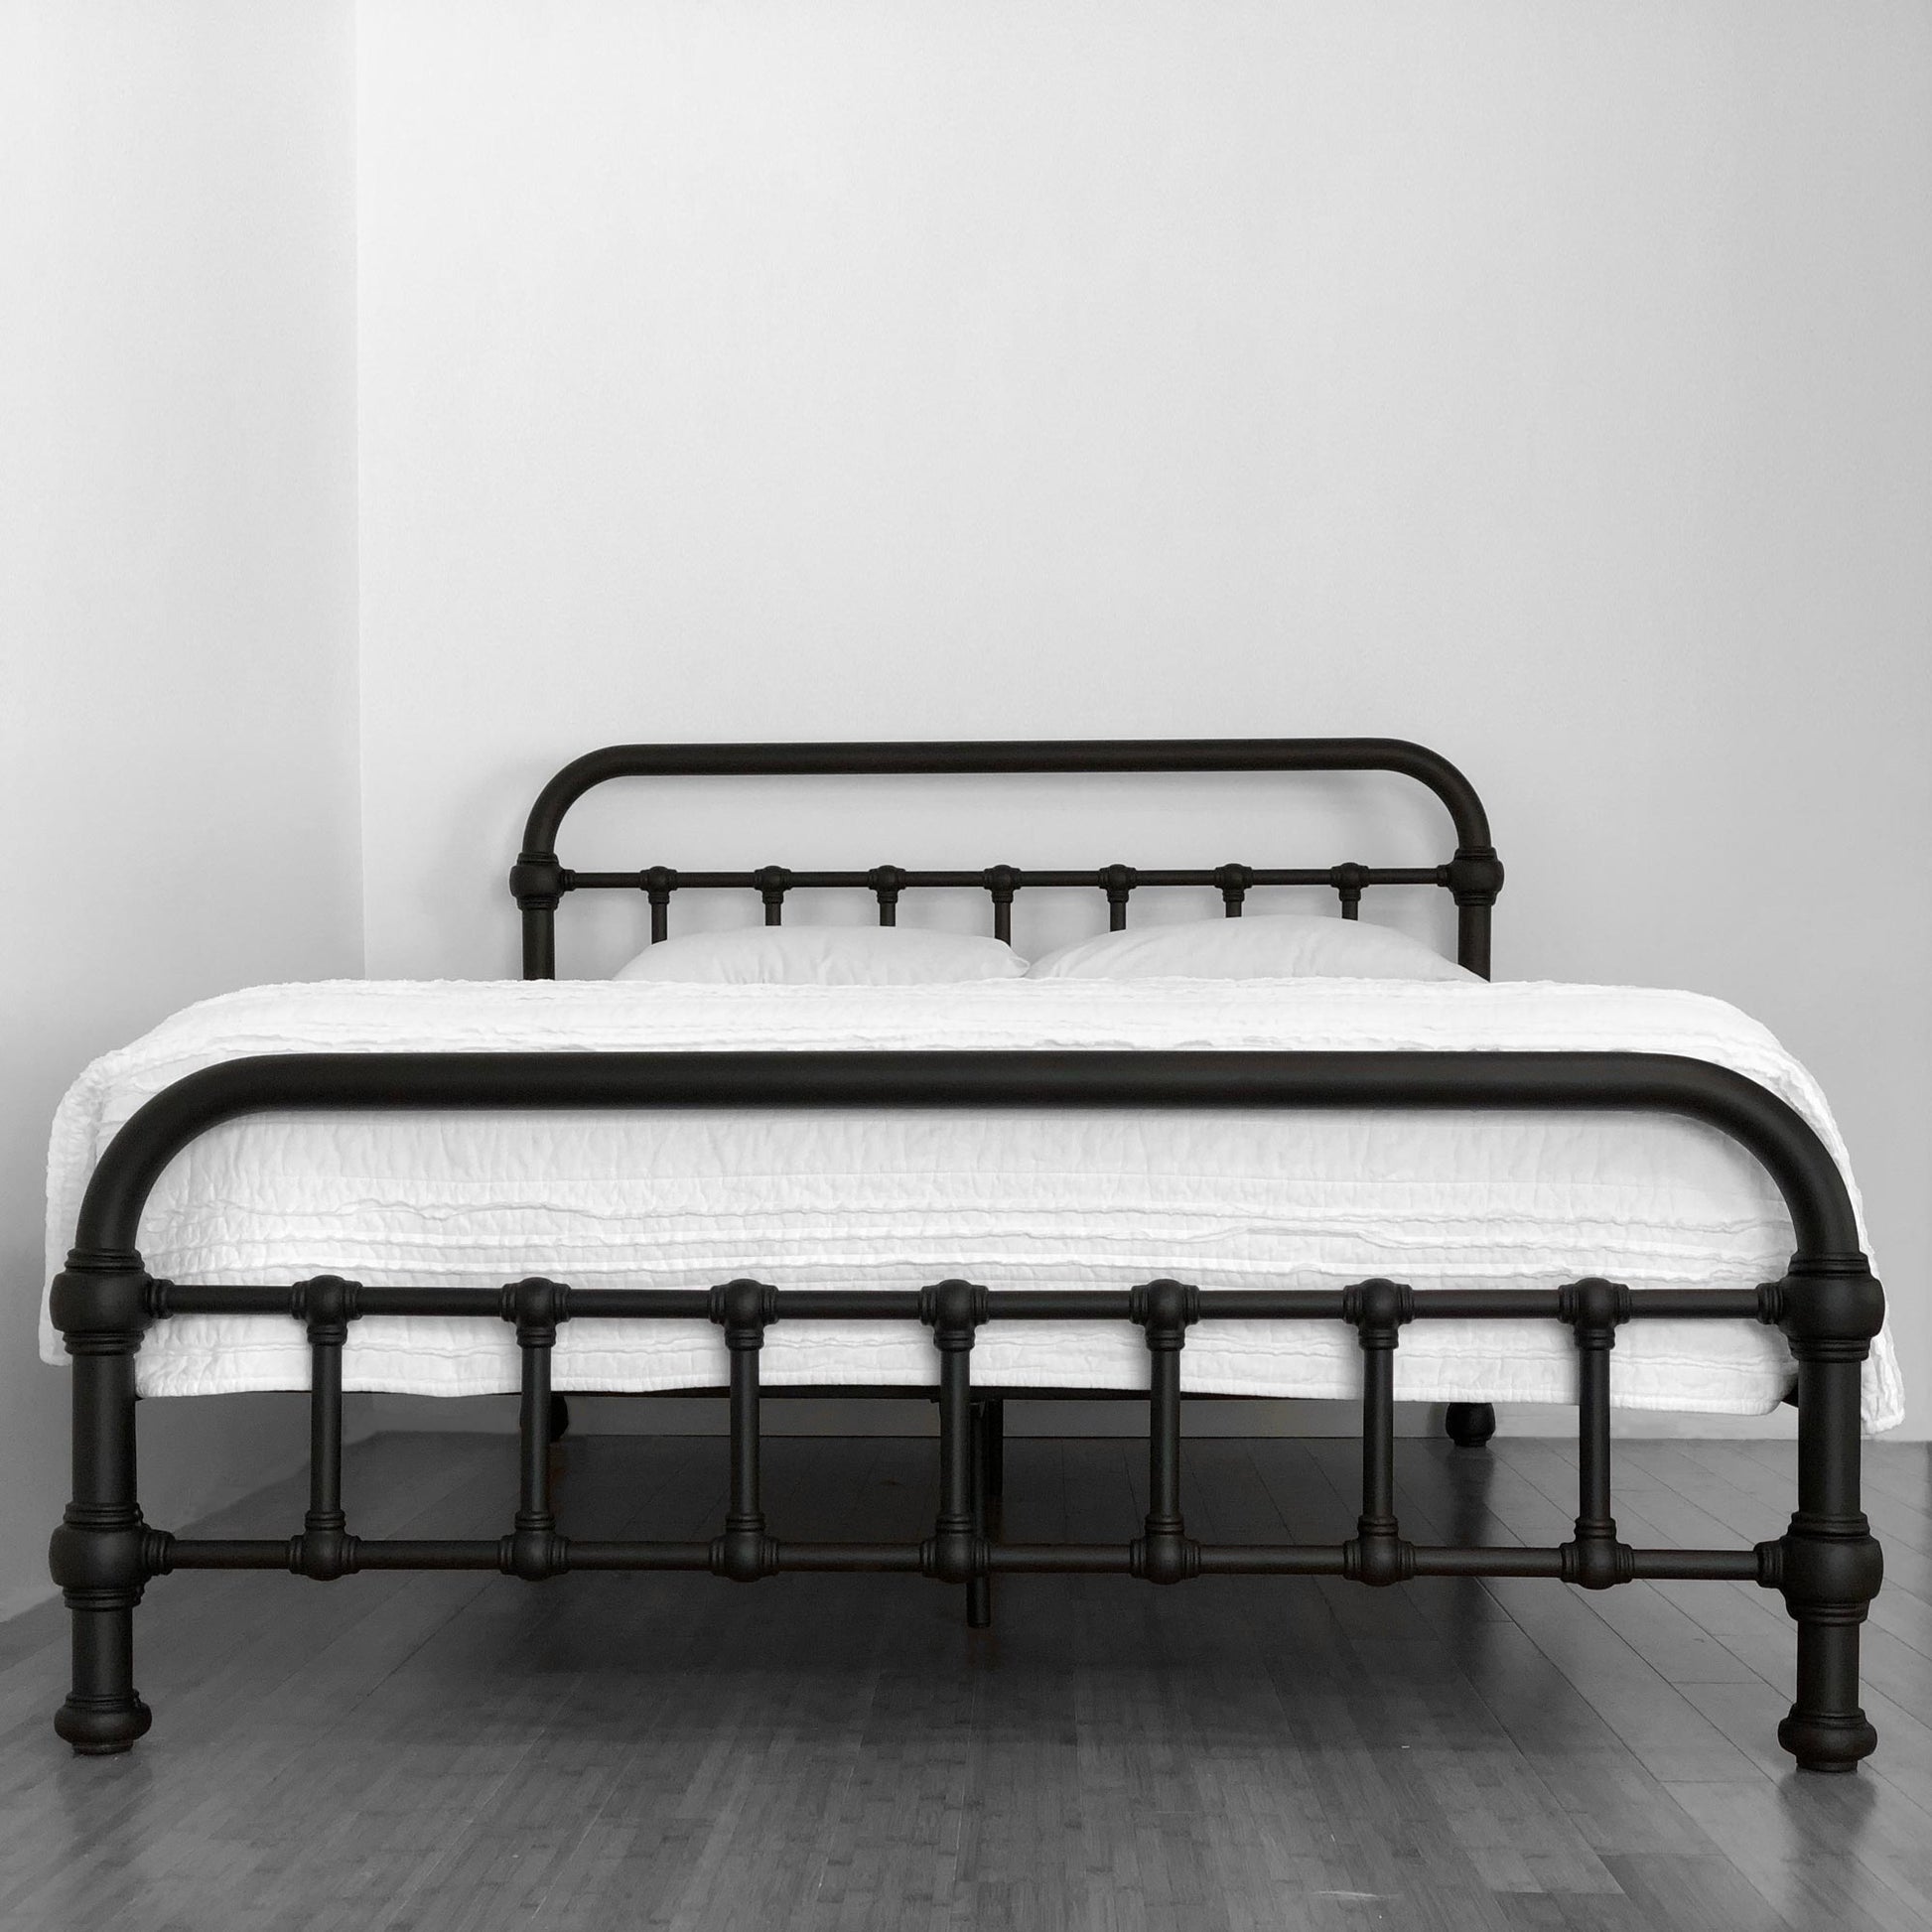 Heiressy's 20th c Americana Iron Platform Bed is a modern design update to the timeless classic original Heiressy bed featuring a super sturdy steel platform frame and solid wood slats.